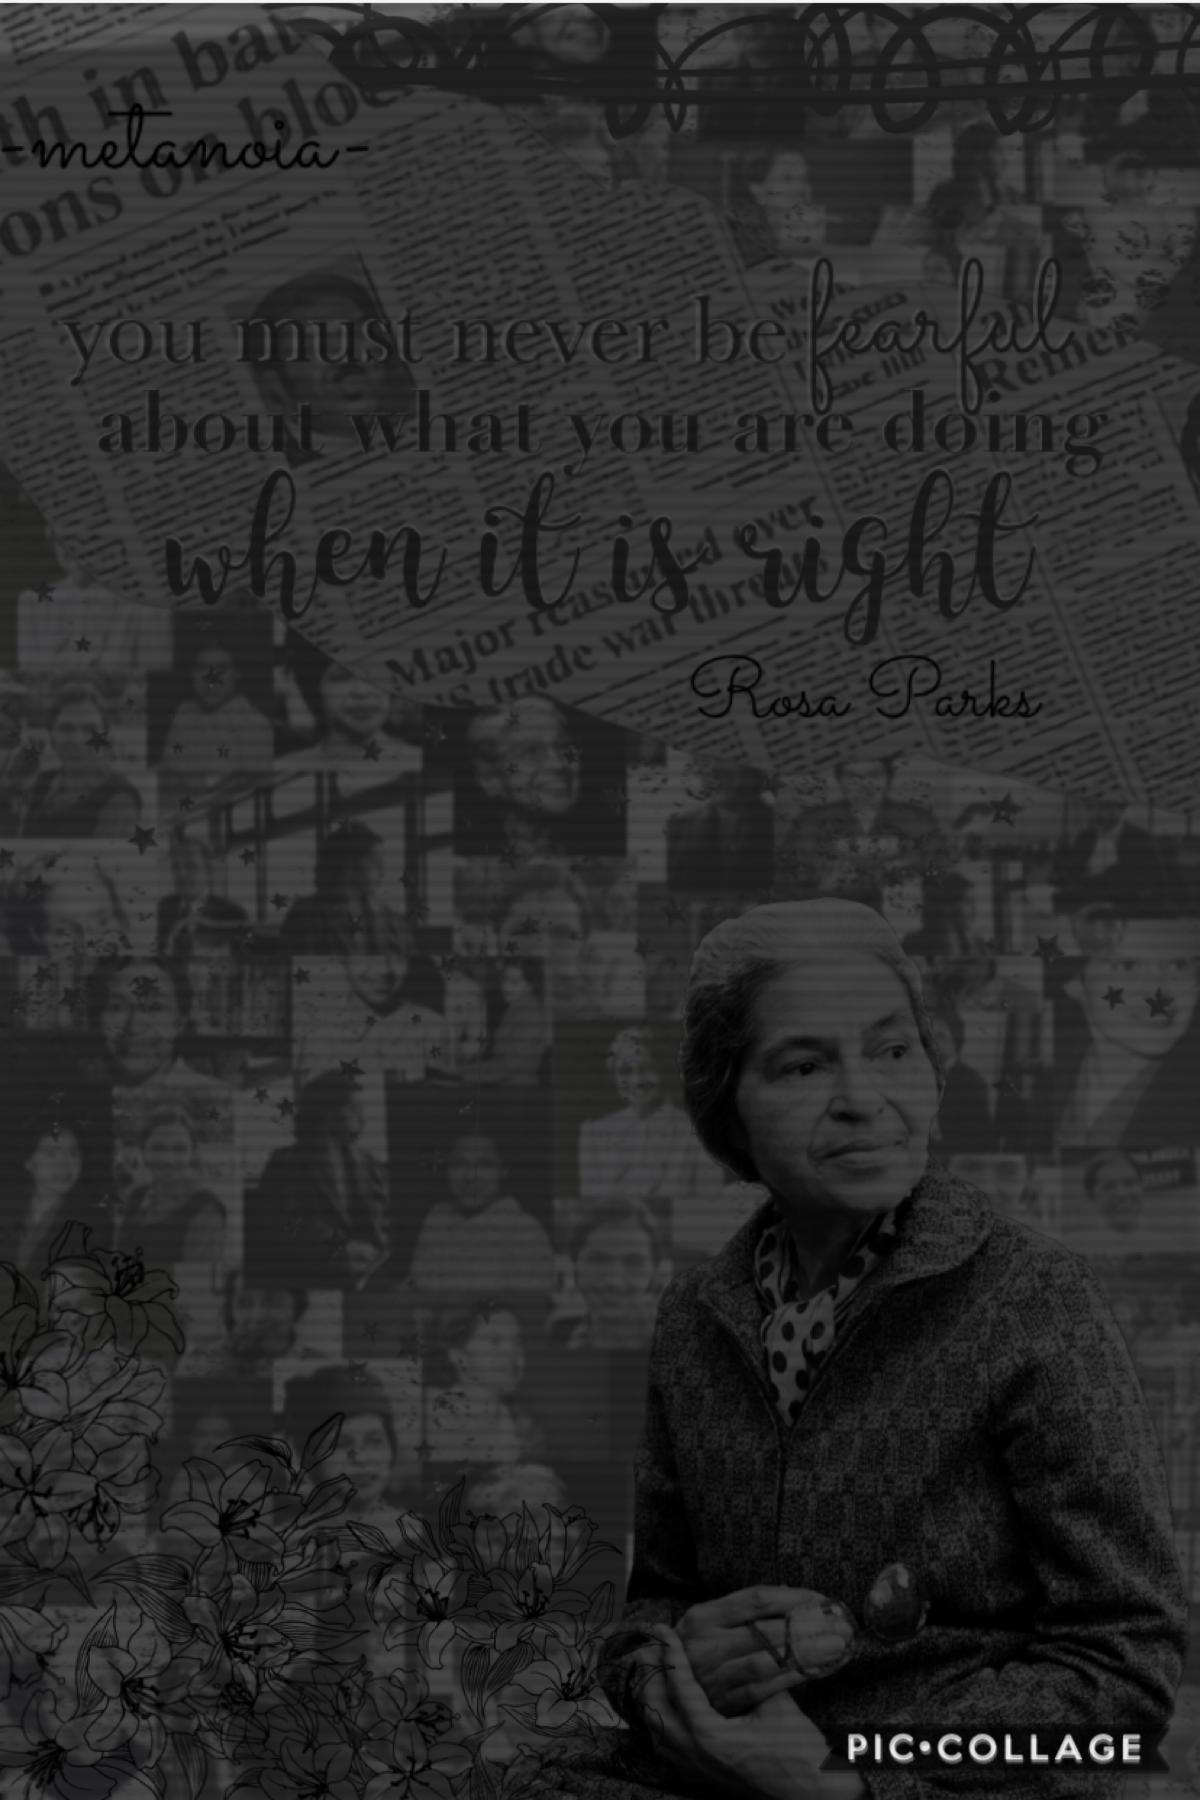 ✊🏿tap✊🏿
This is my Rosa parks collage for ocean’s black history month series (go follow her bye she’s super sweet). Next up is euph0ria. check remixes for a little information thingy ocean made ☺️ 